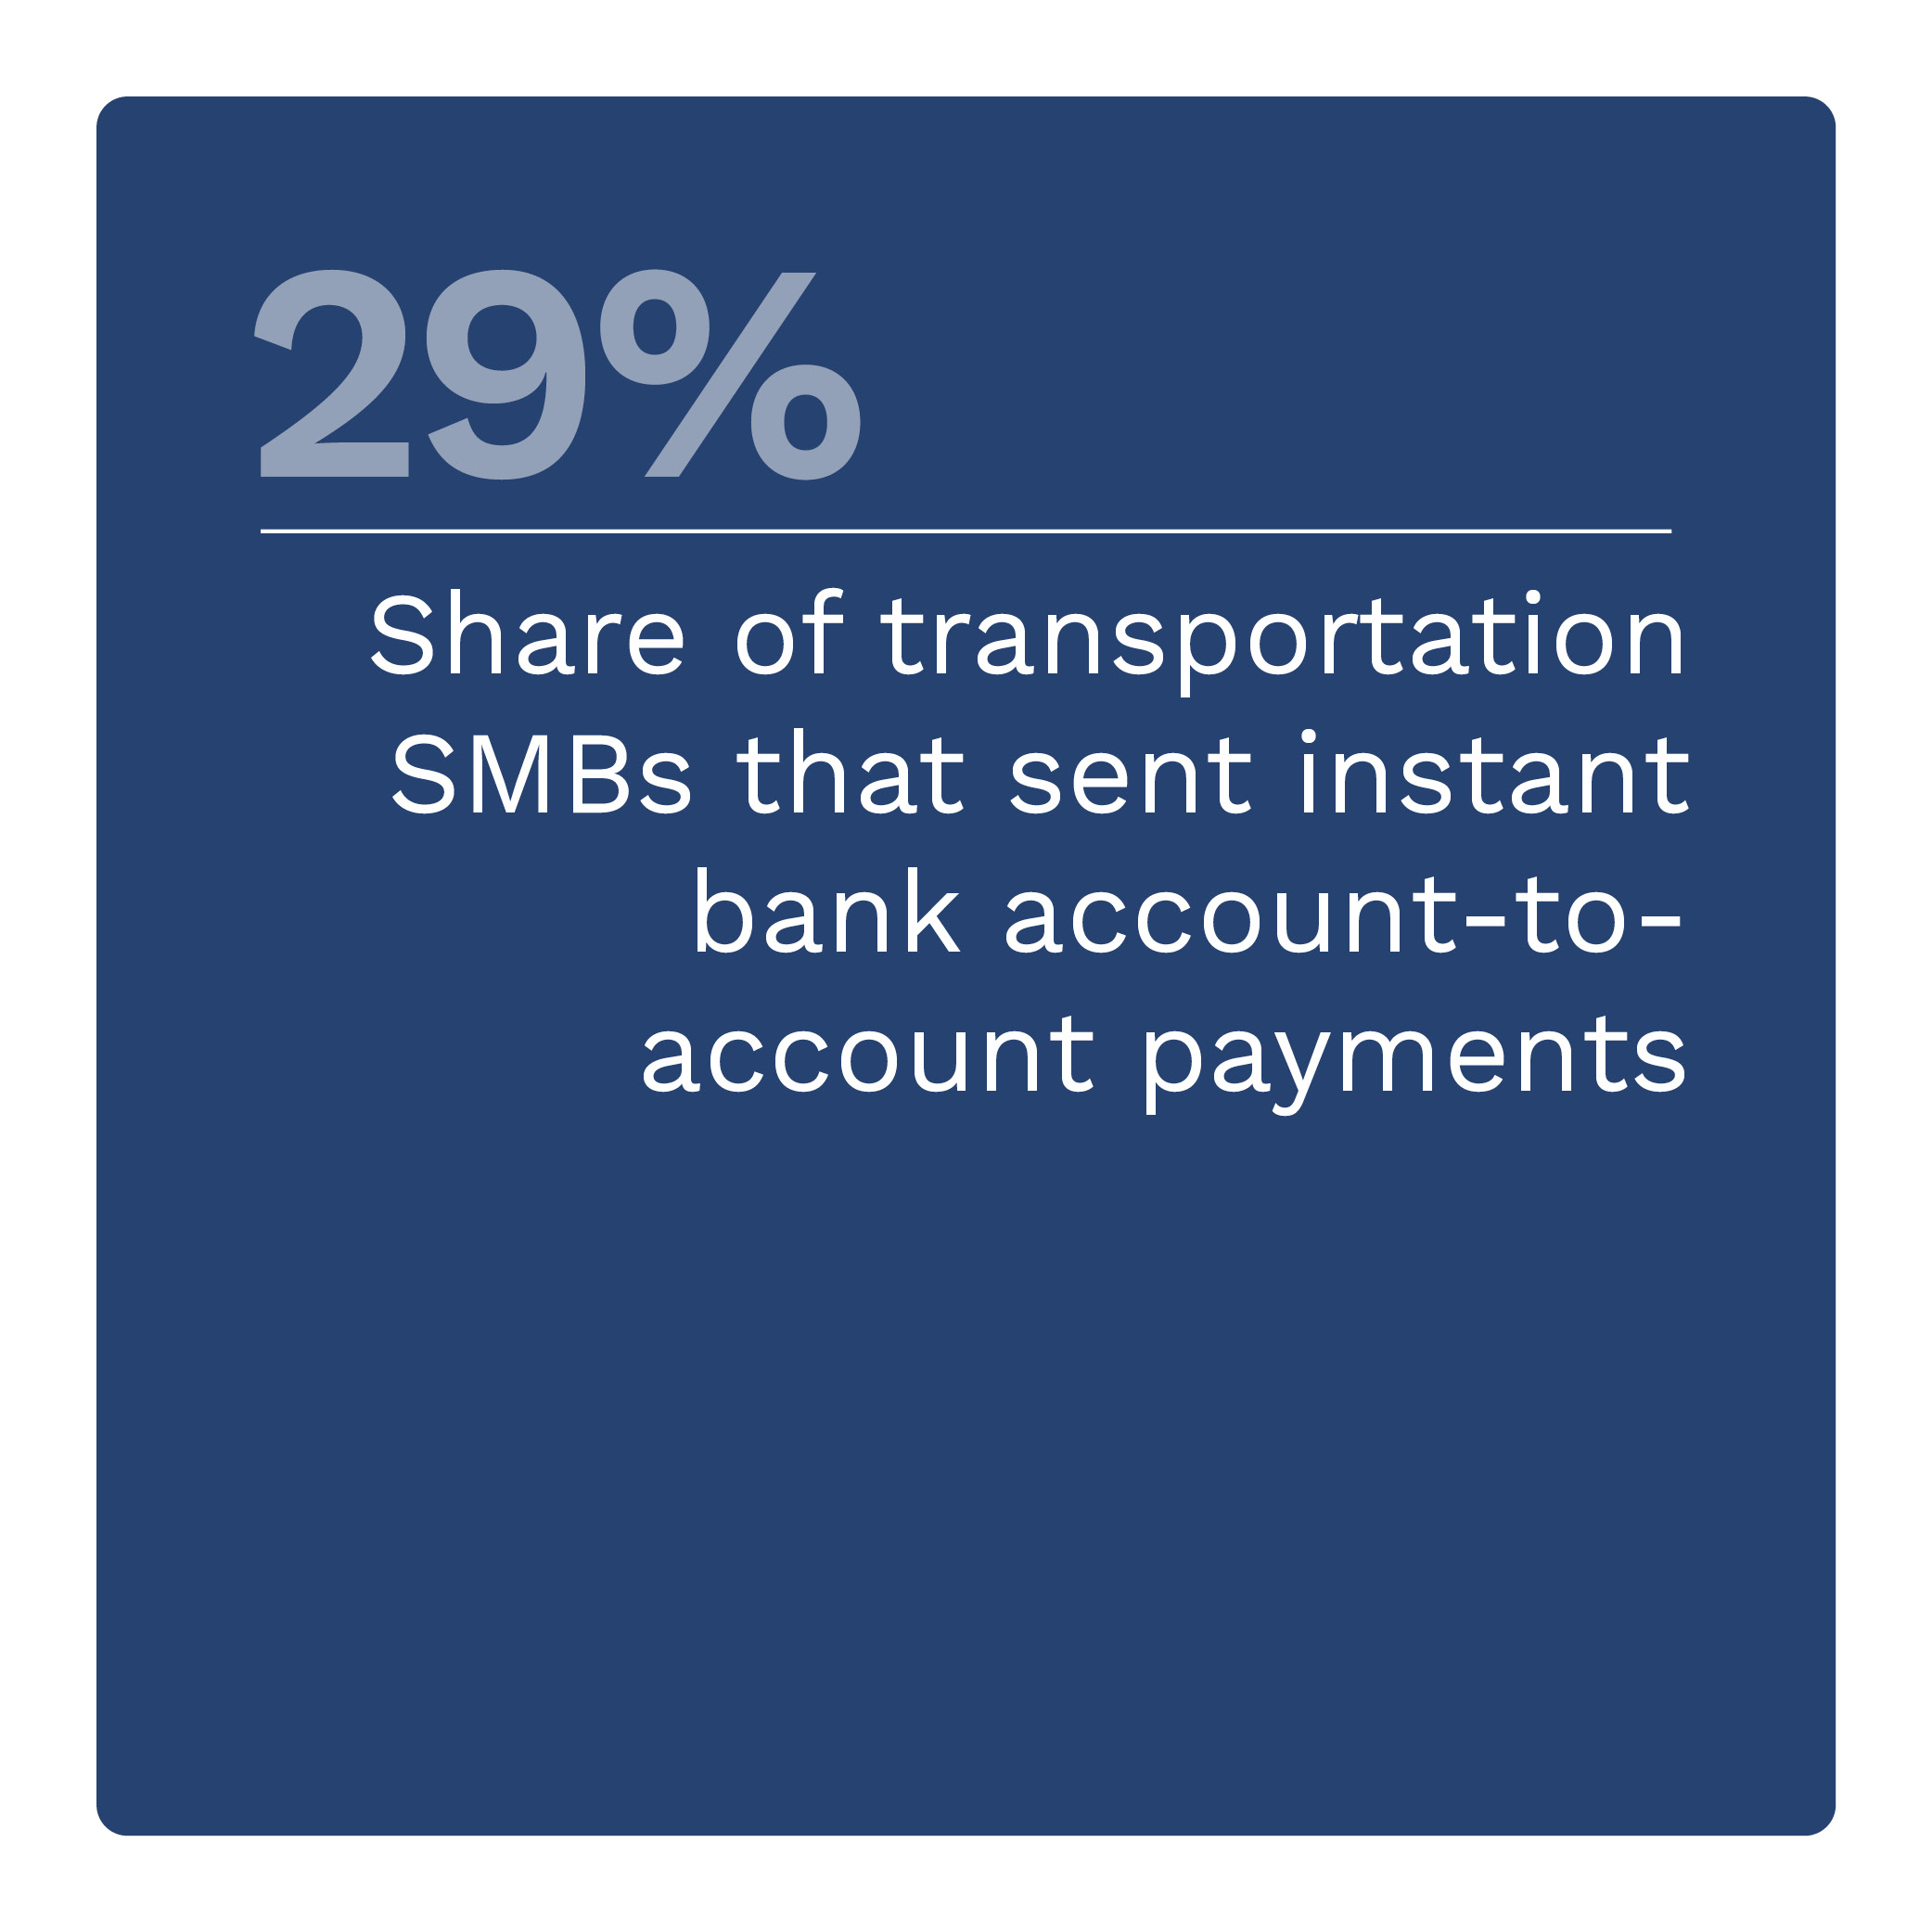  Share of transportation SMBs that sent instant bank account-to-account payments